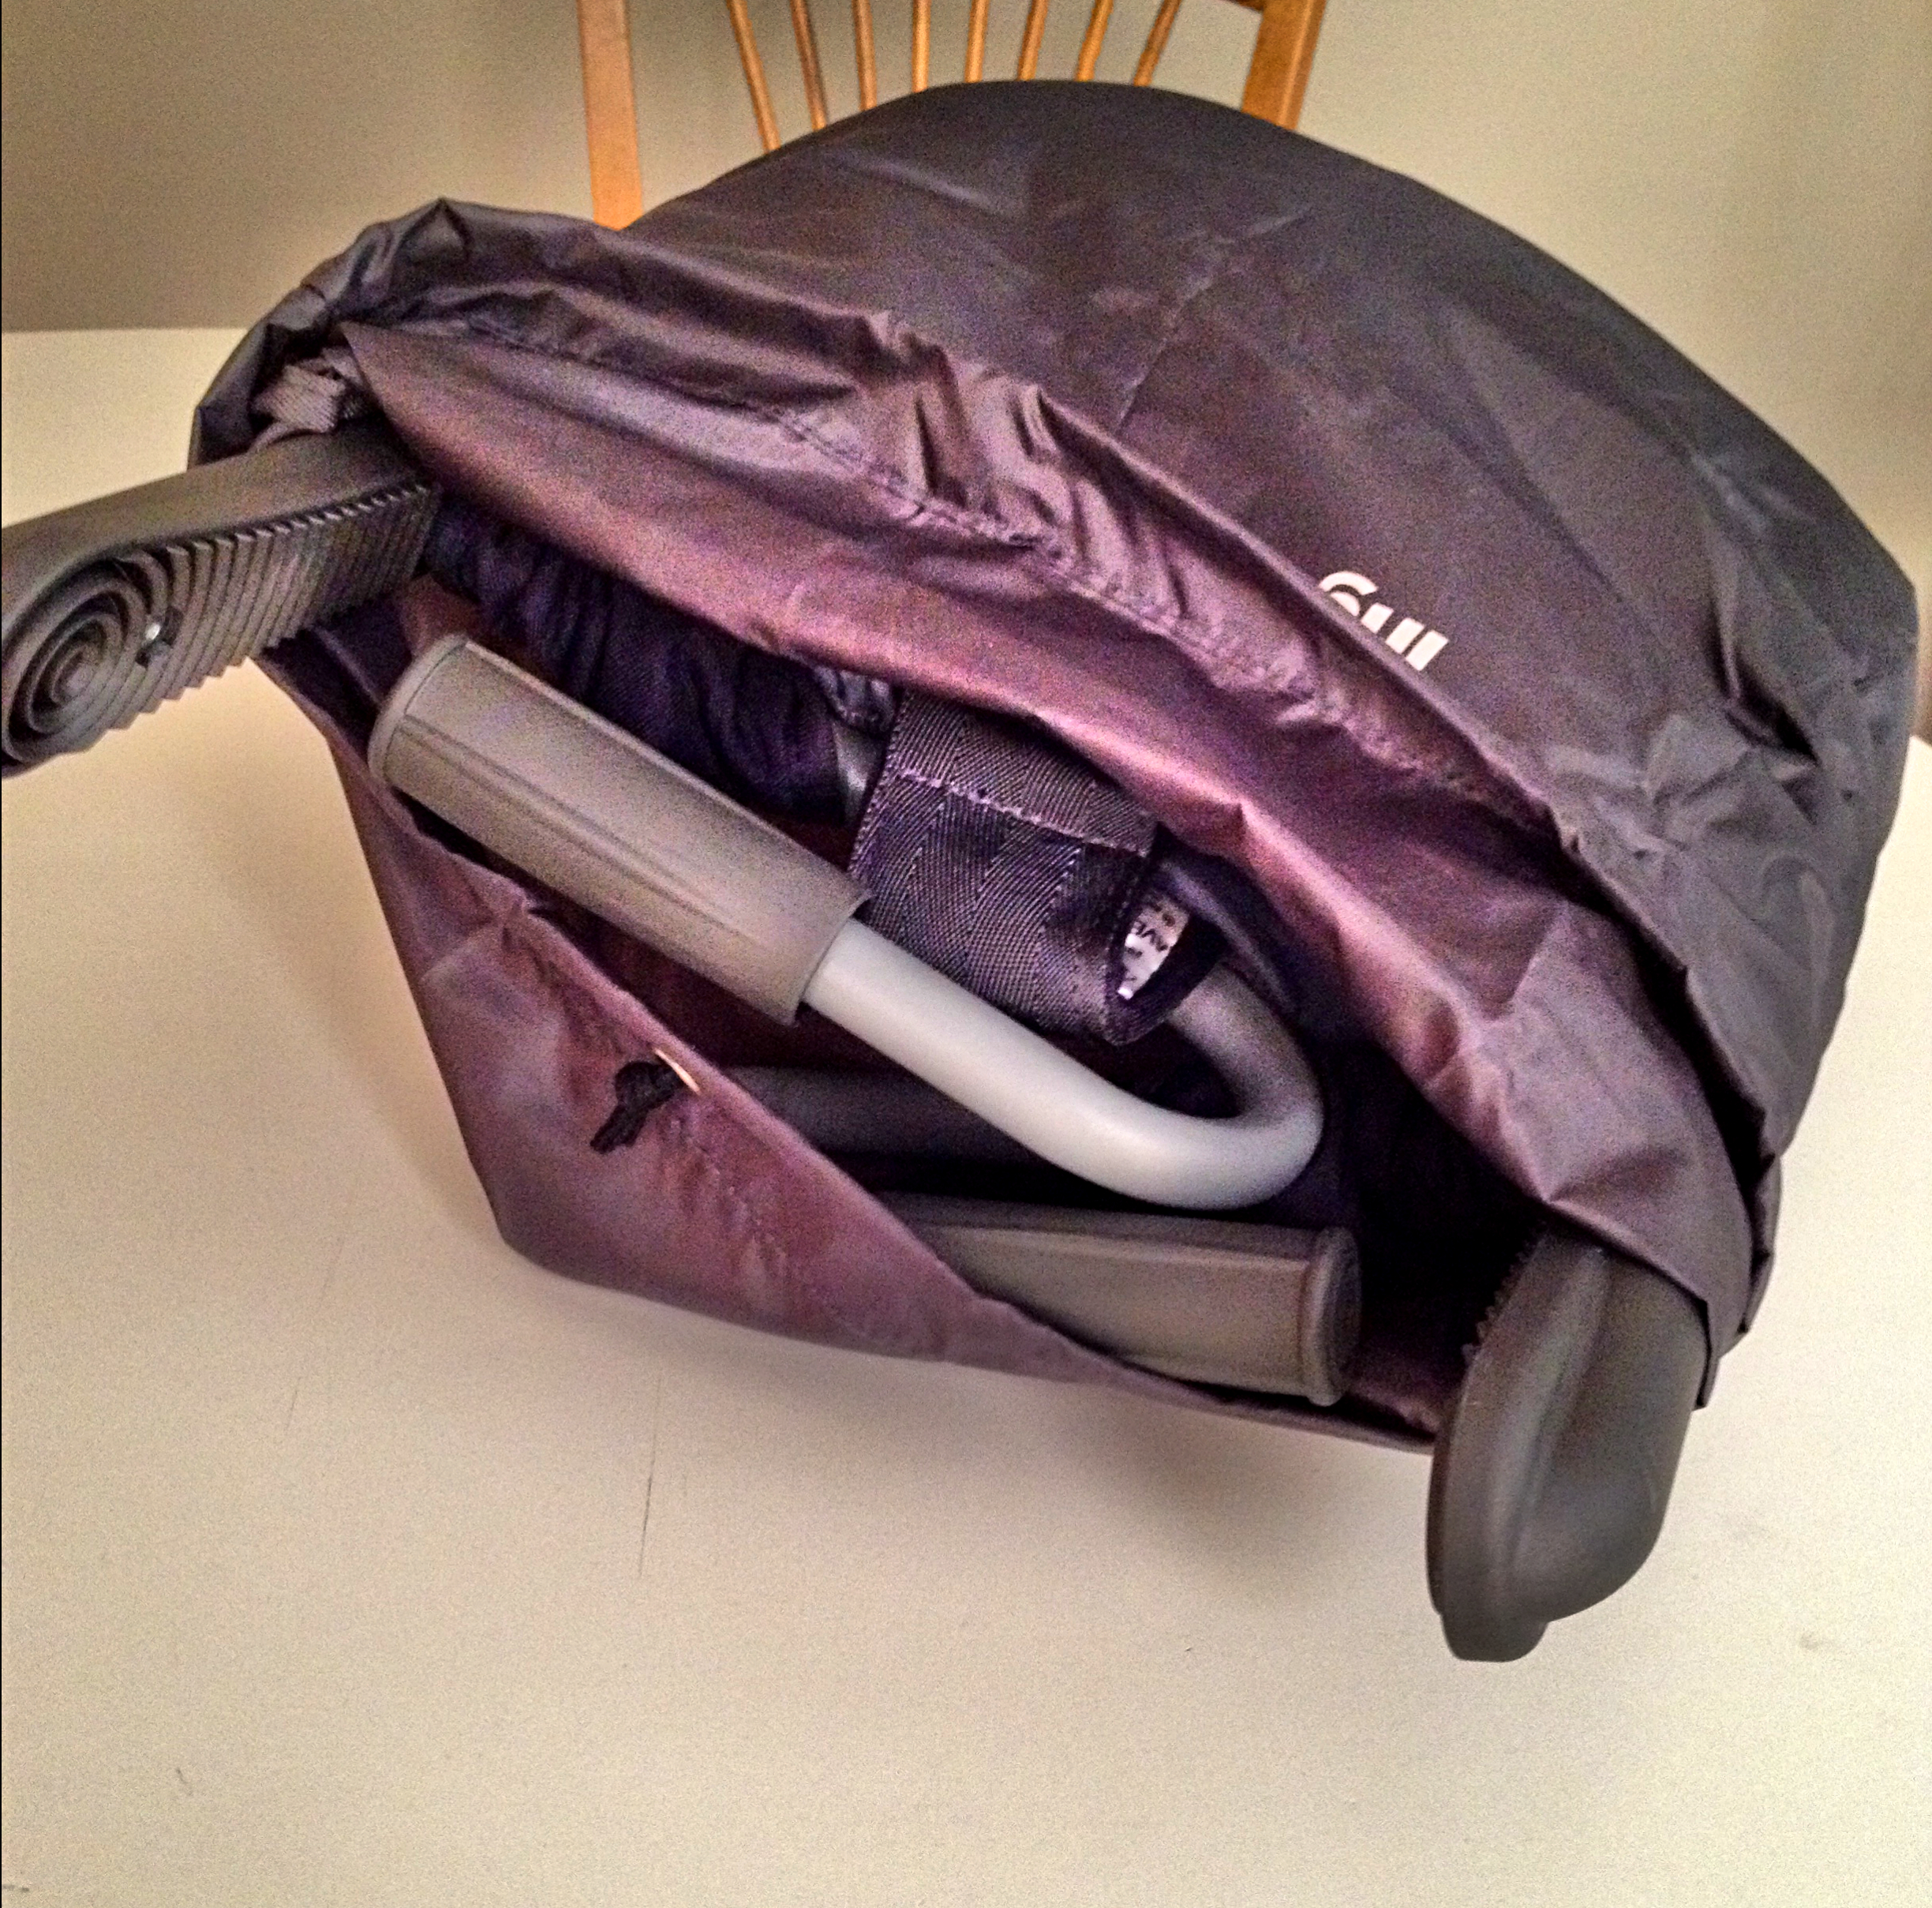 built in bag for easy travel and storage